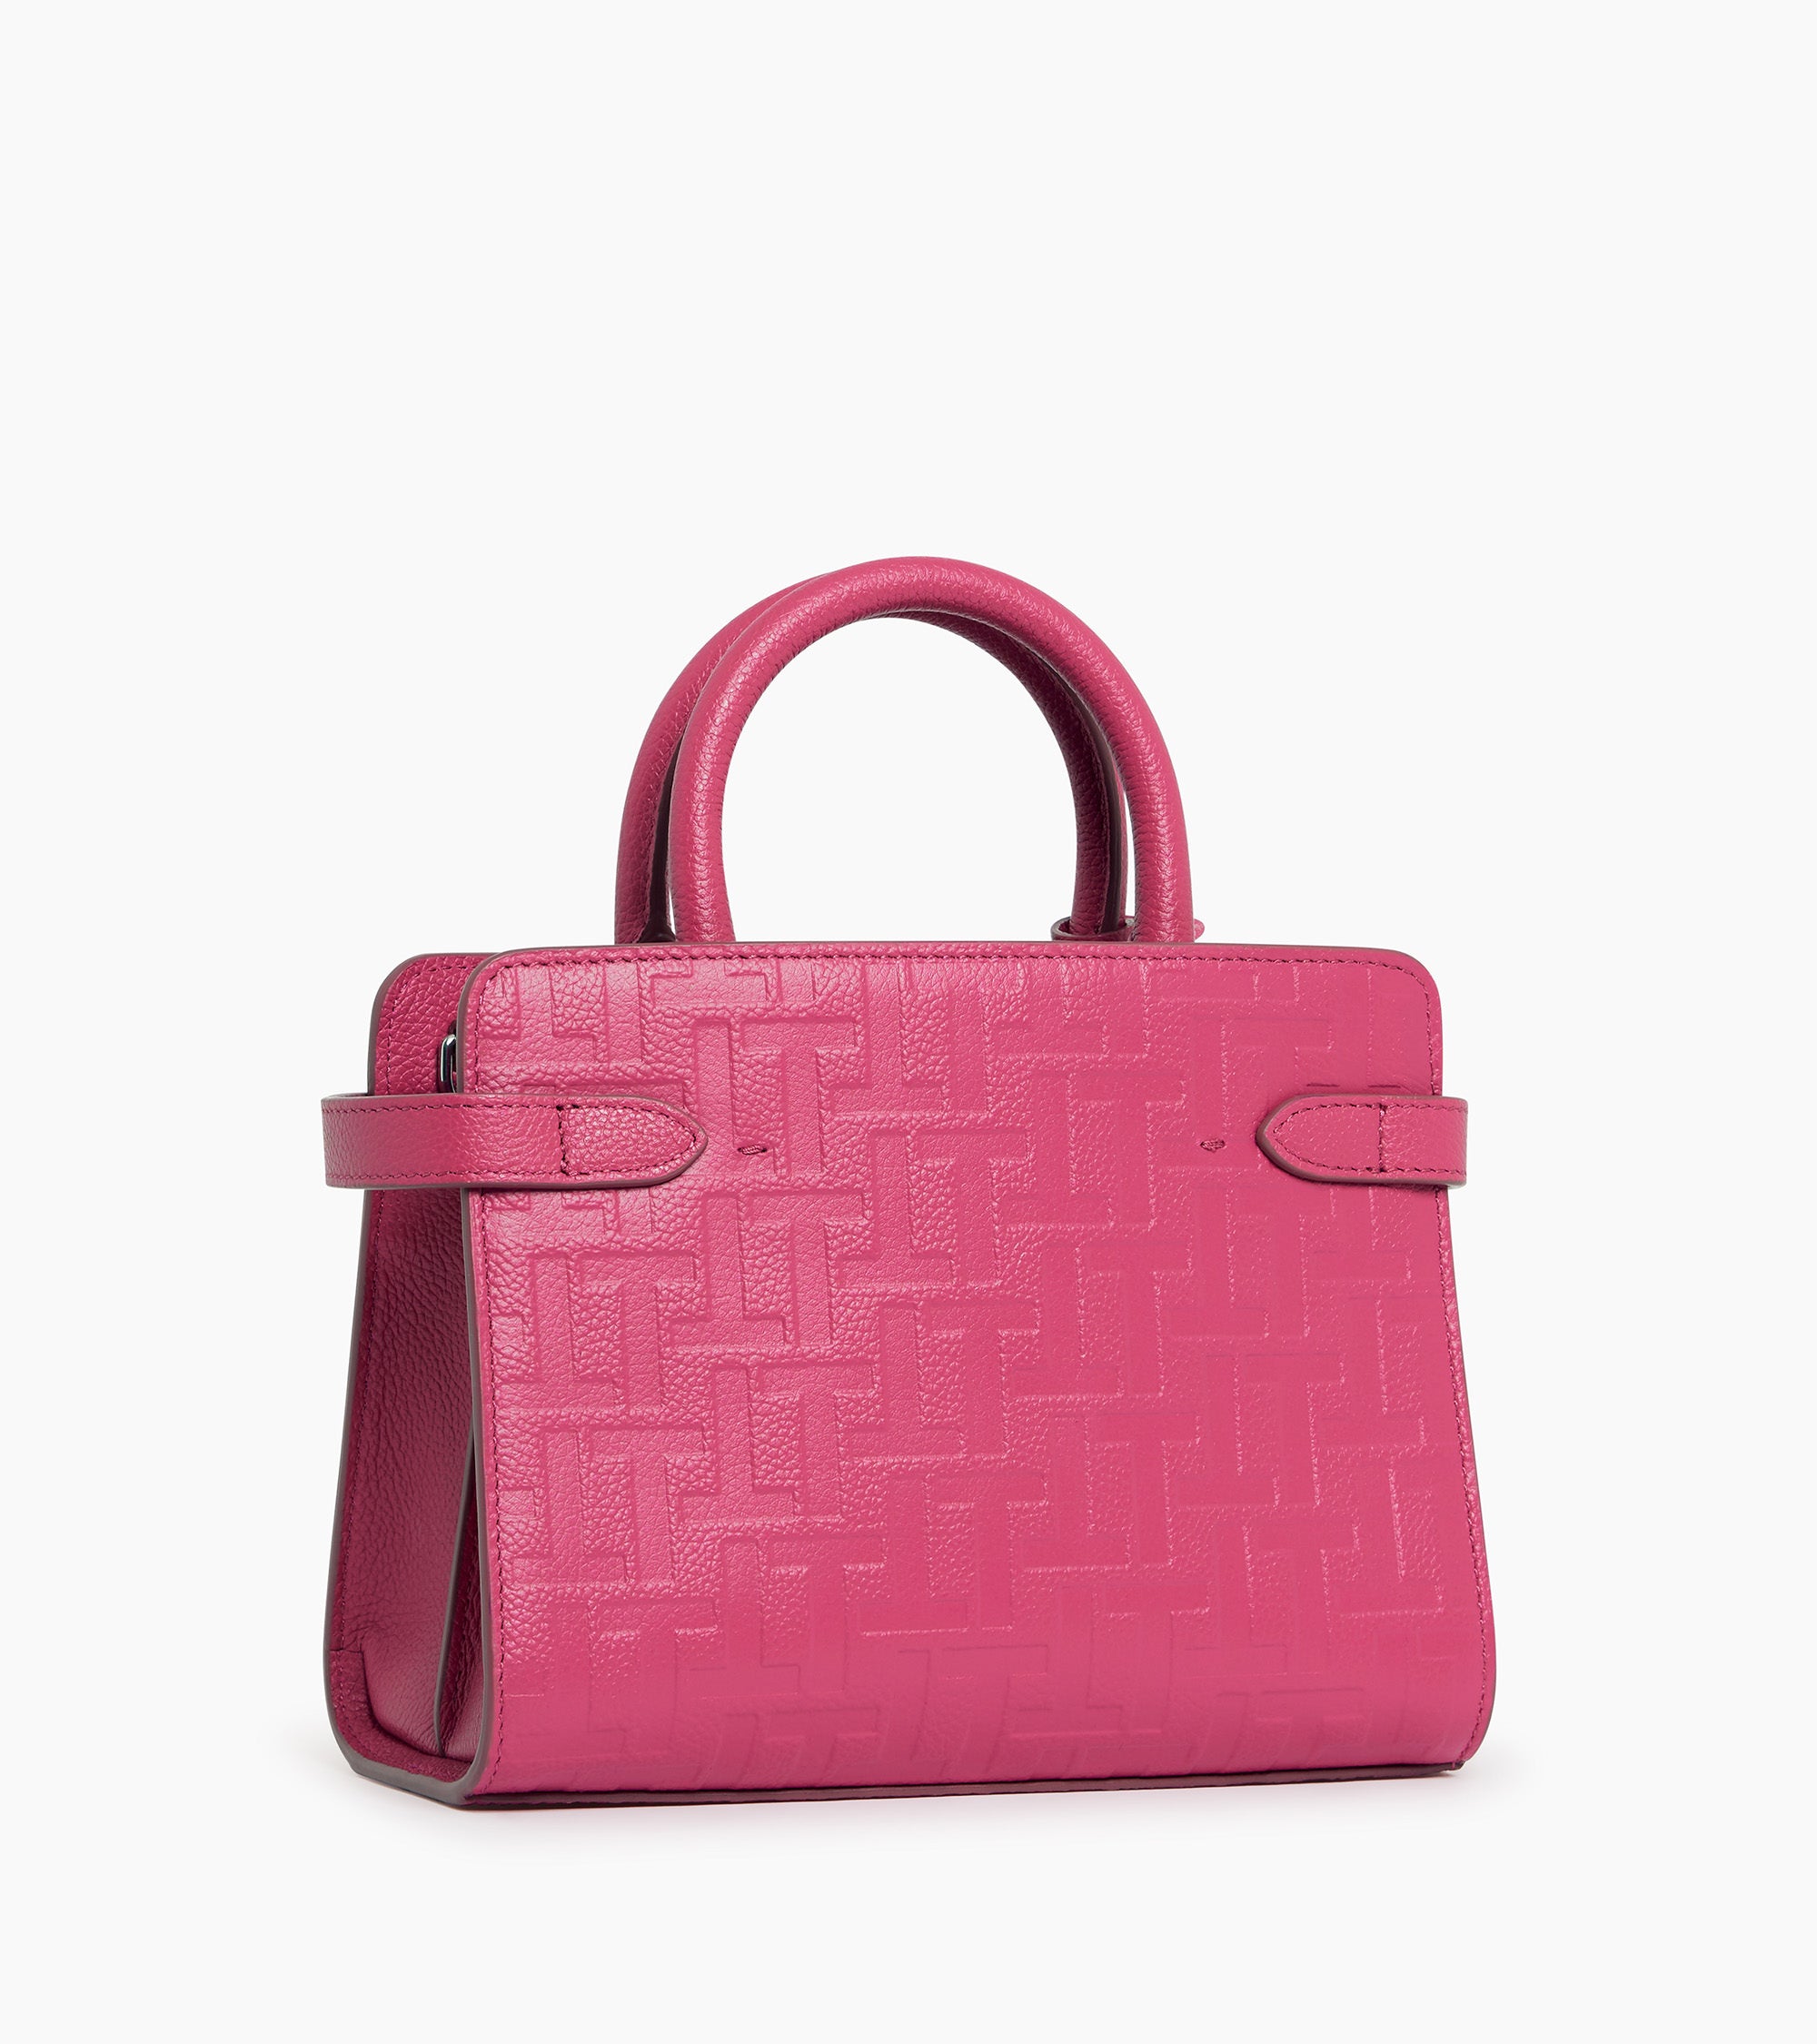 Emilie small handbag in embossed T leather